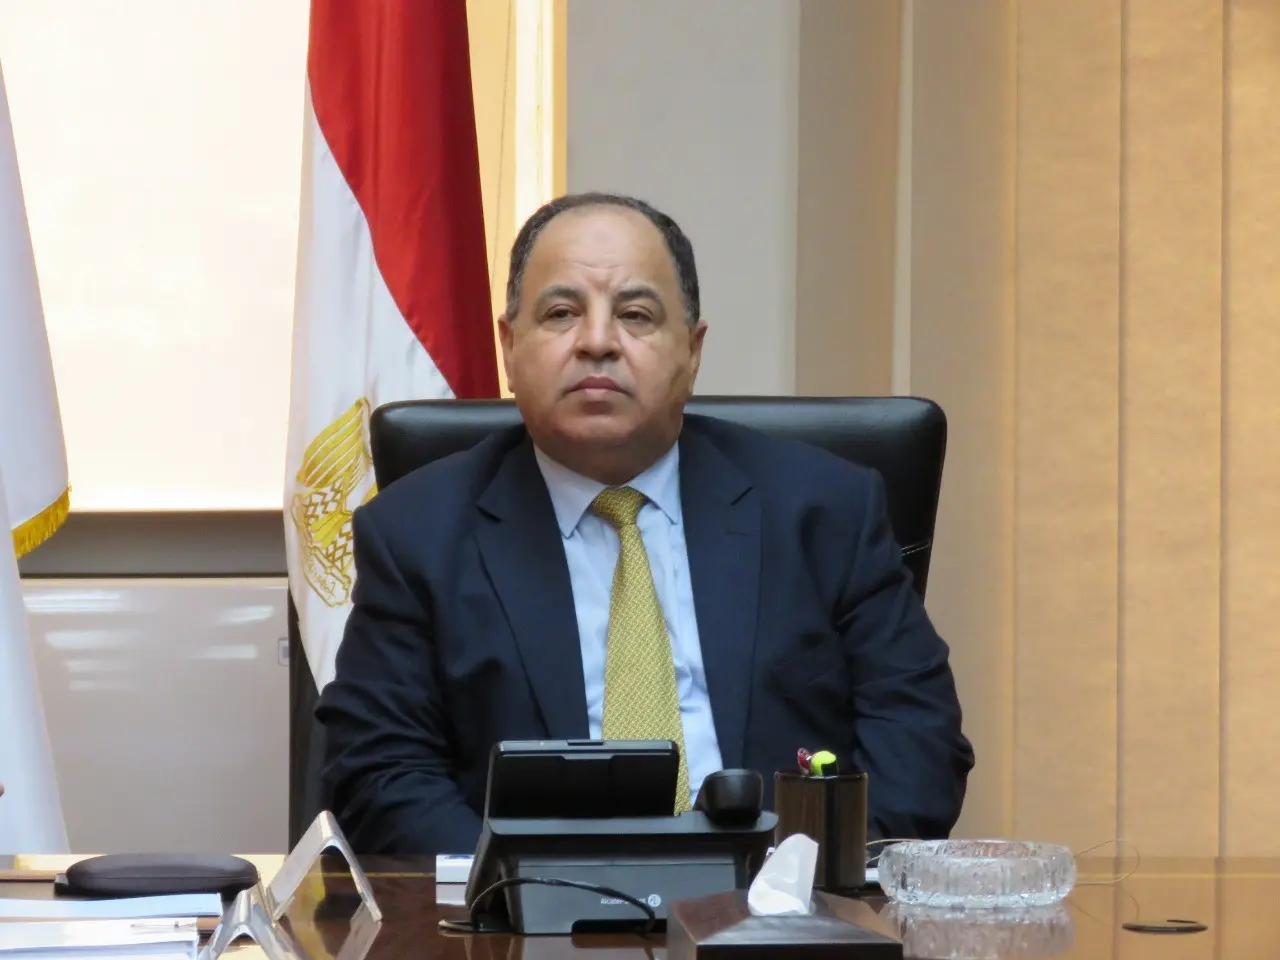 In carrying out the presidential directives, an open budget for health sector to combat “Covid-19” and secure vaccines, Minister of Finance announced